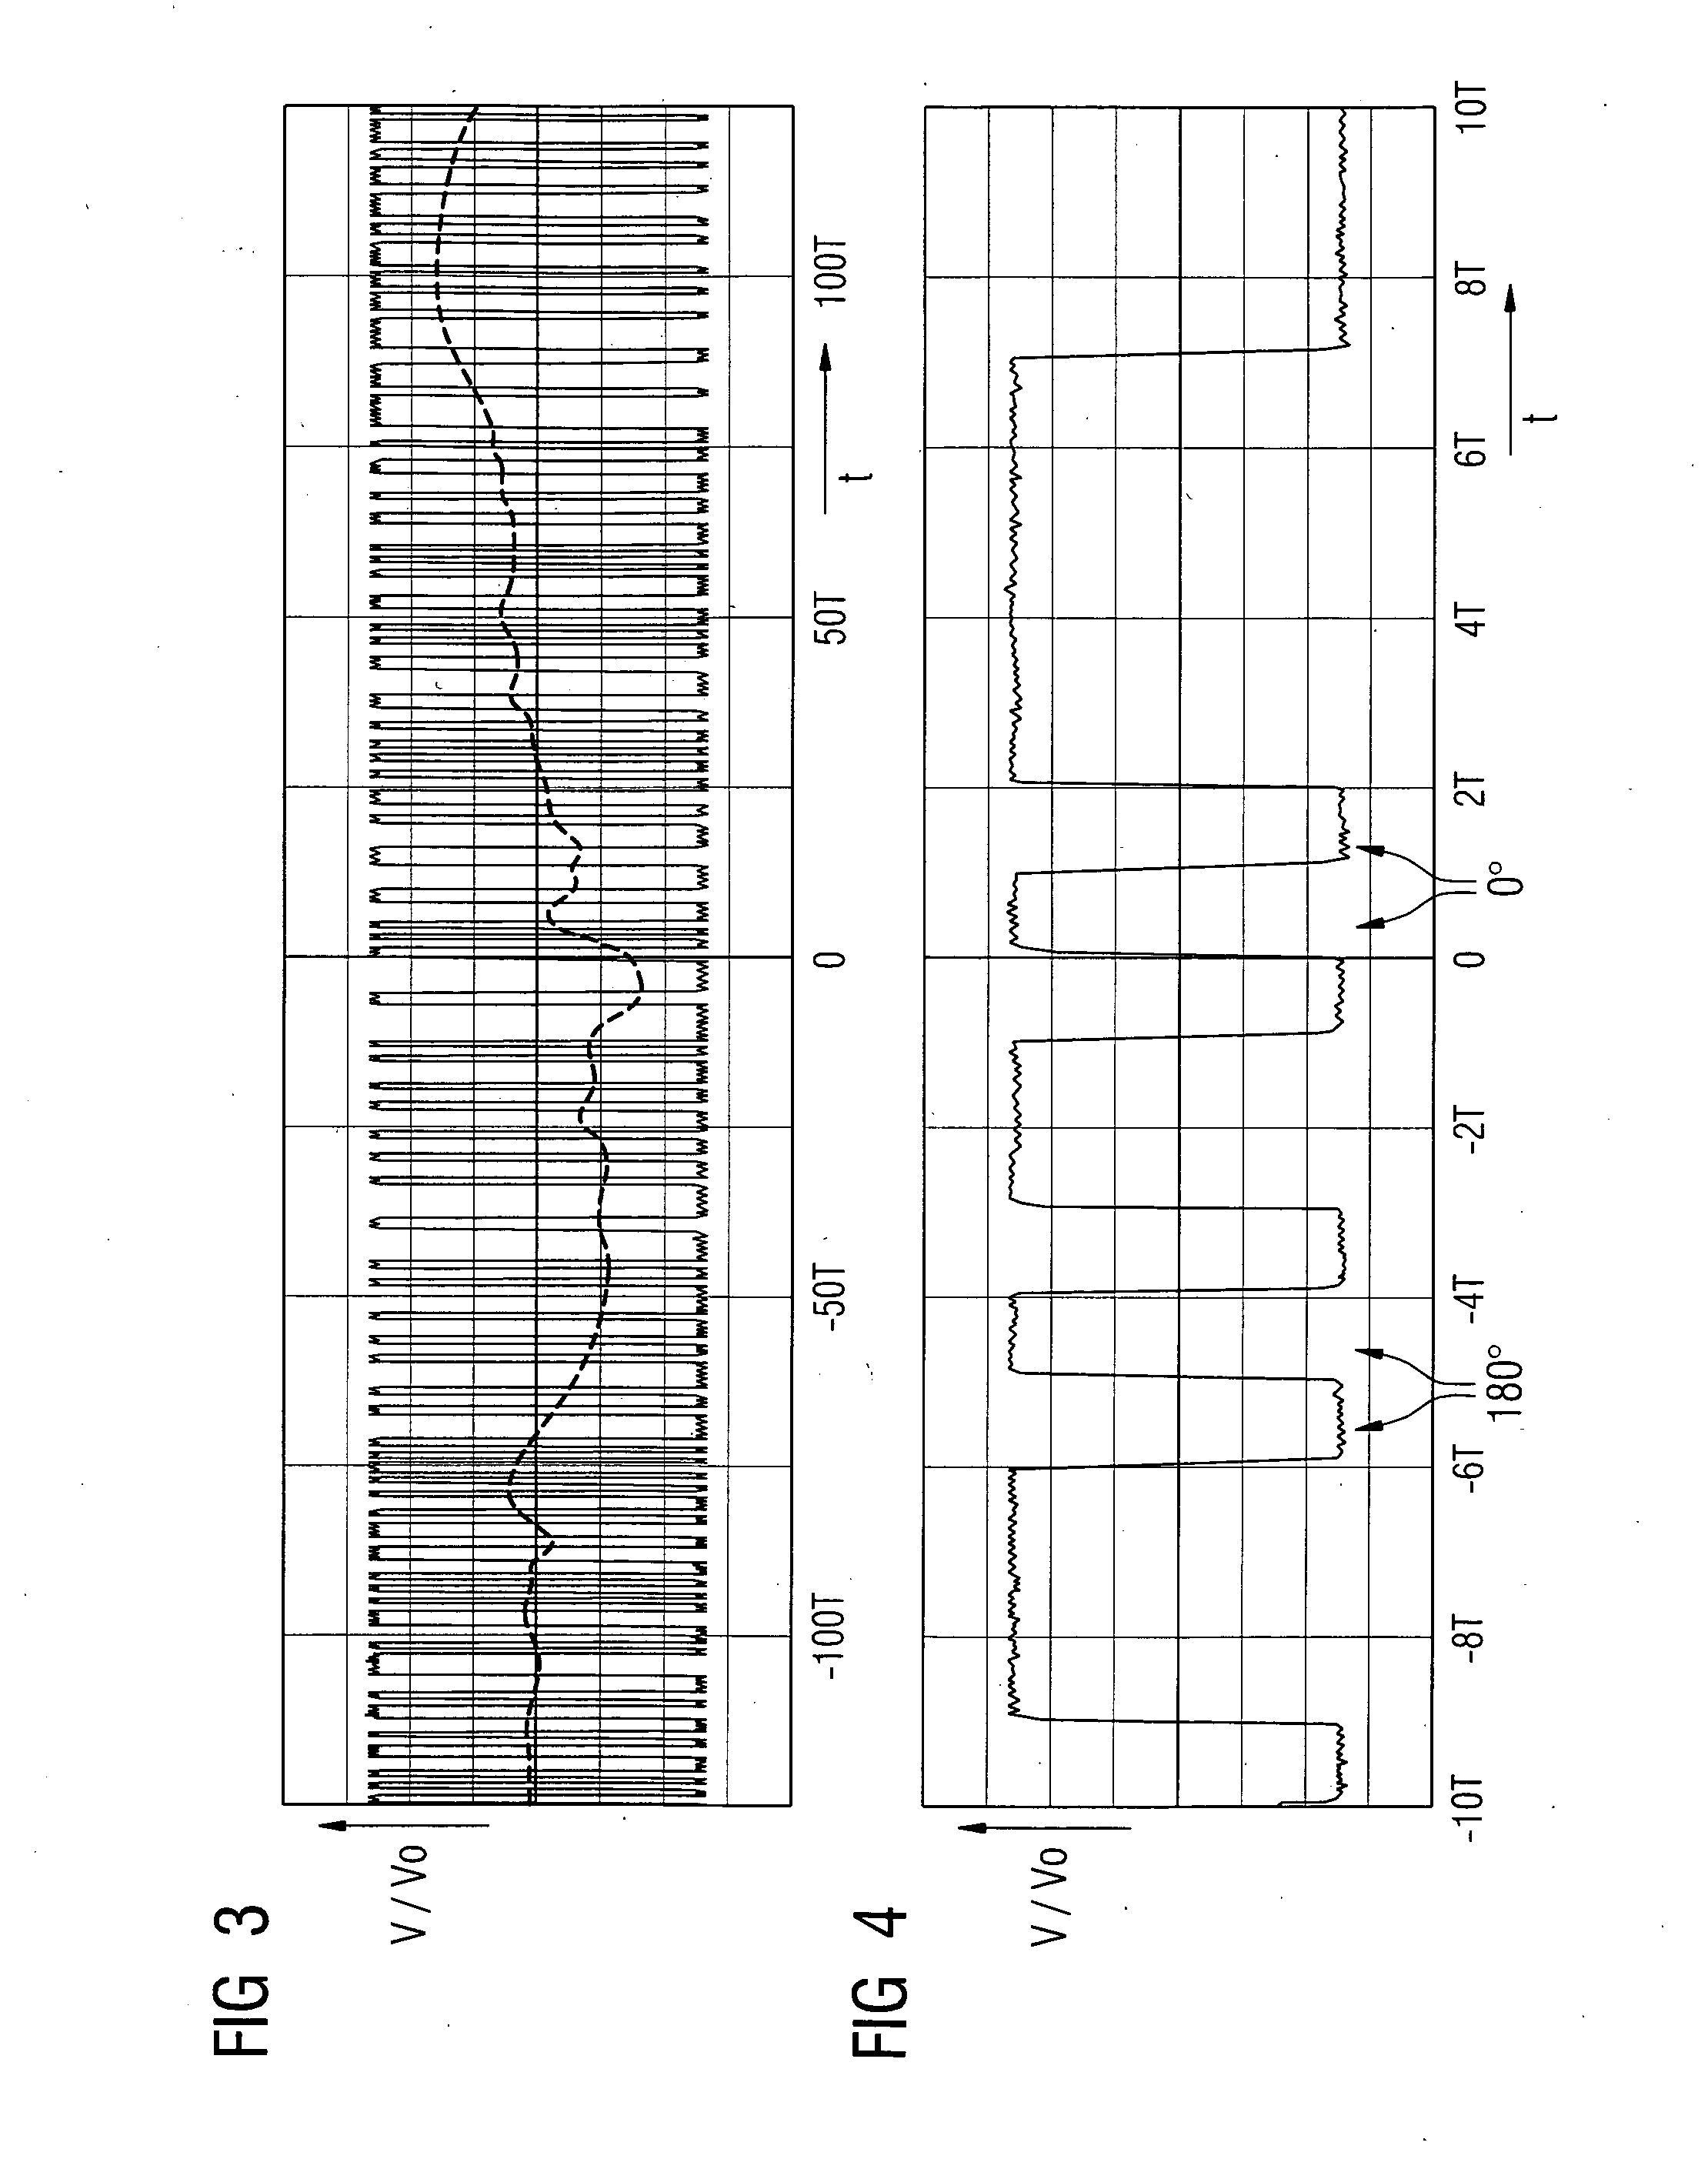 Hearing apparatus with low-interference receiver control and corresponding method